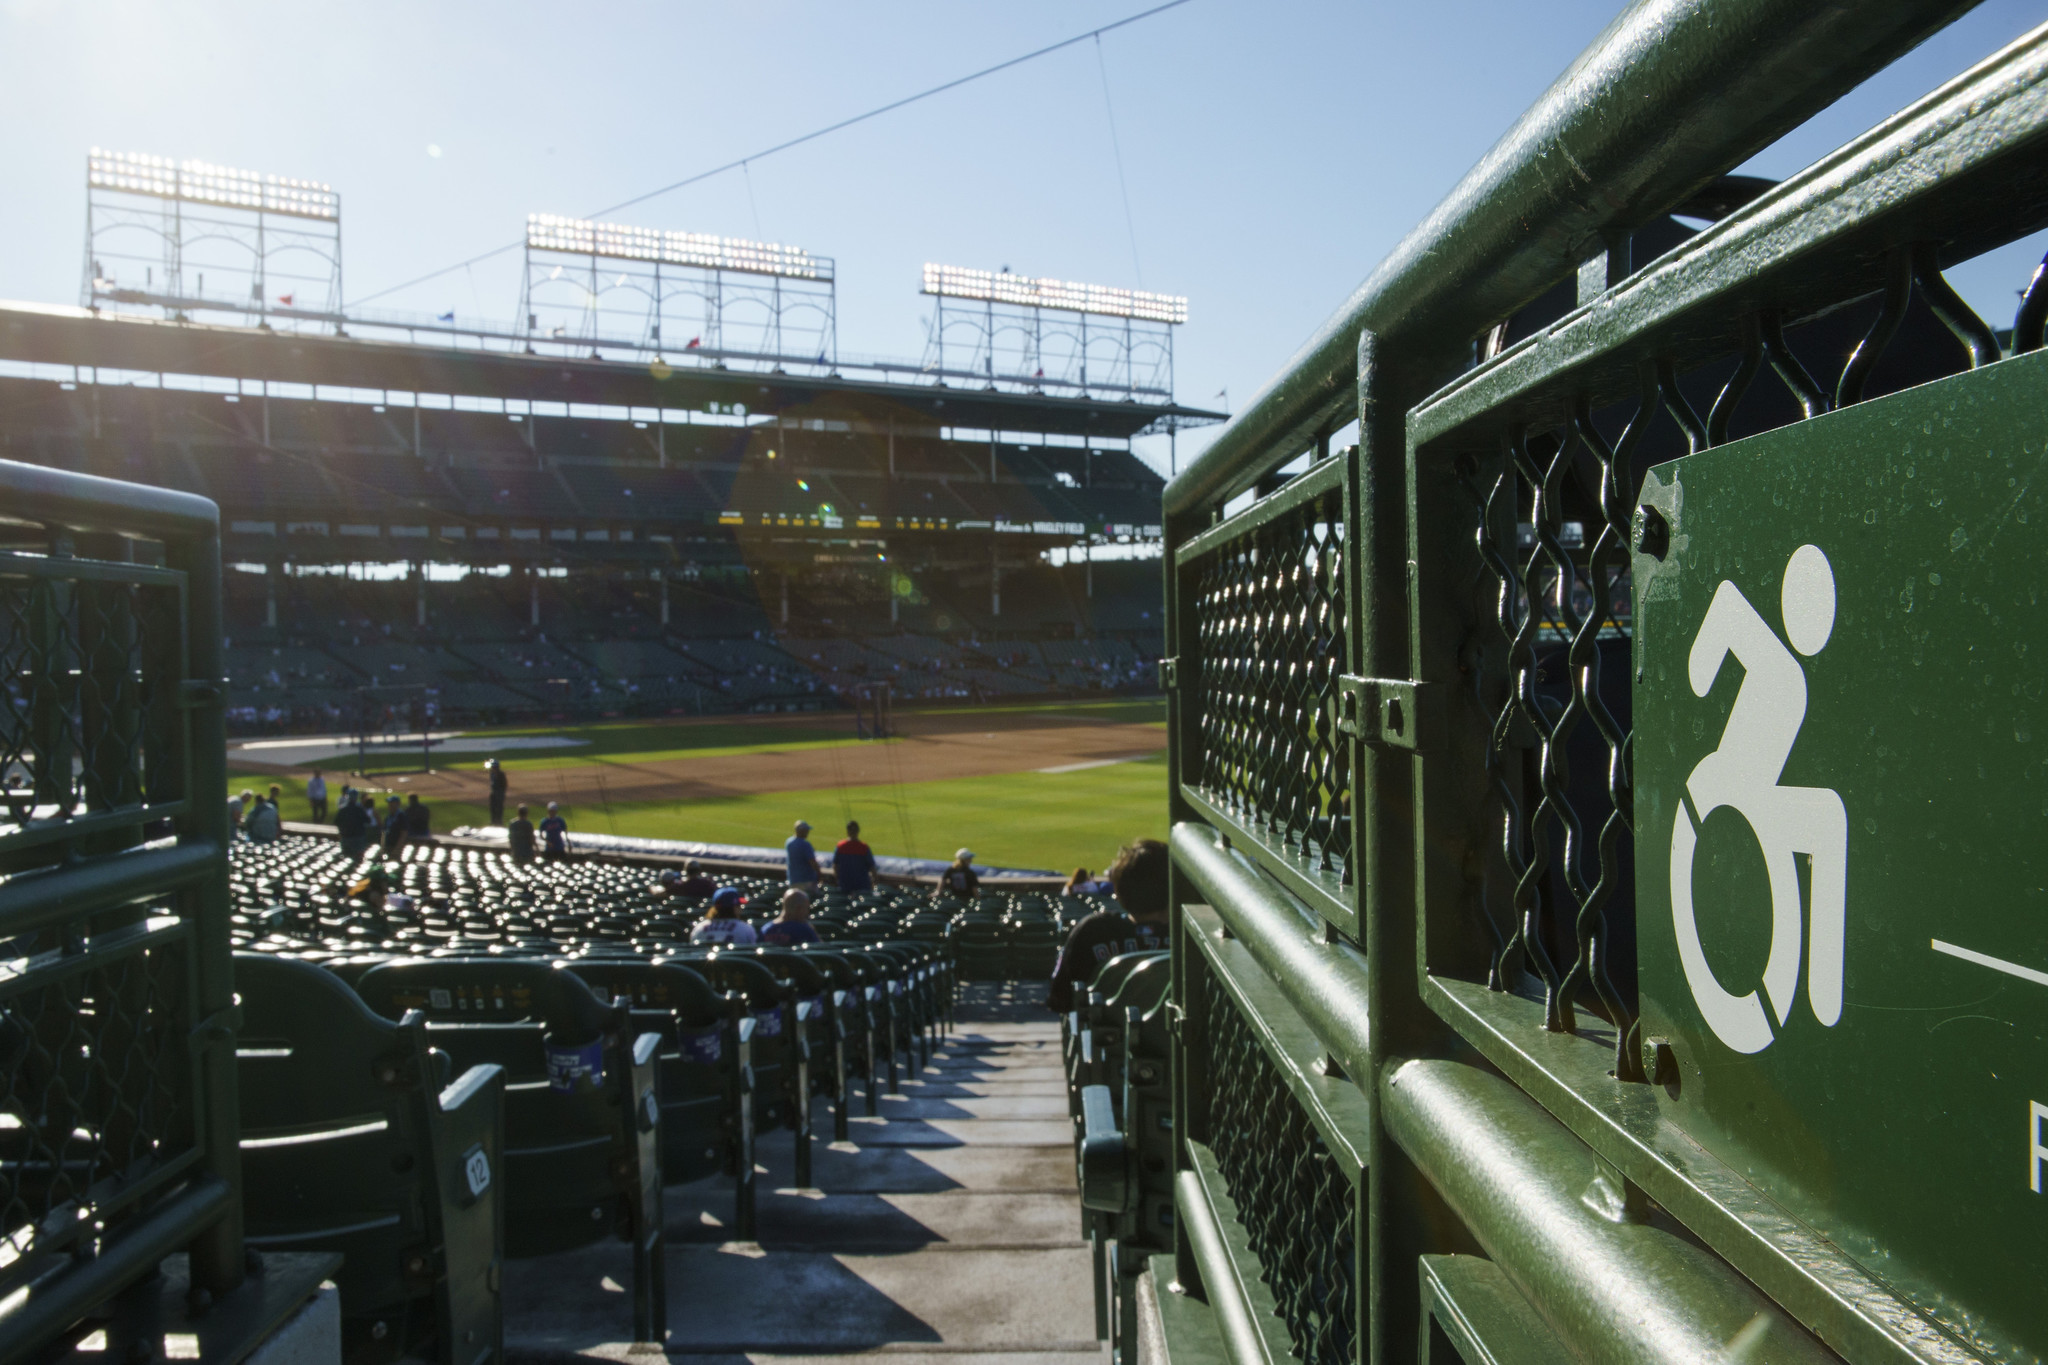 With renovations completed, Wrigley Field back in business